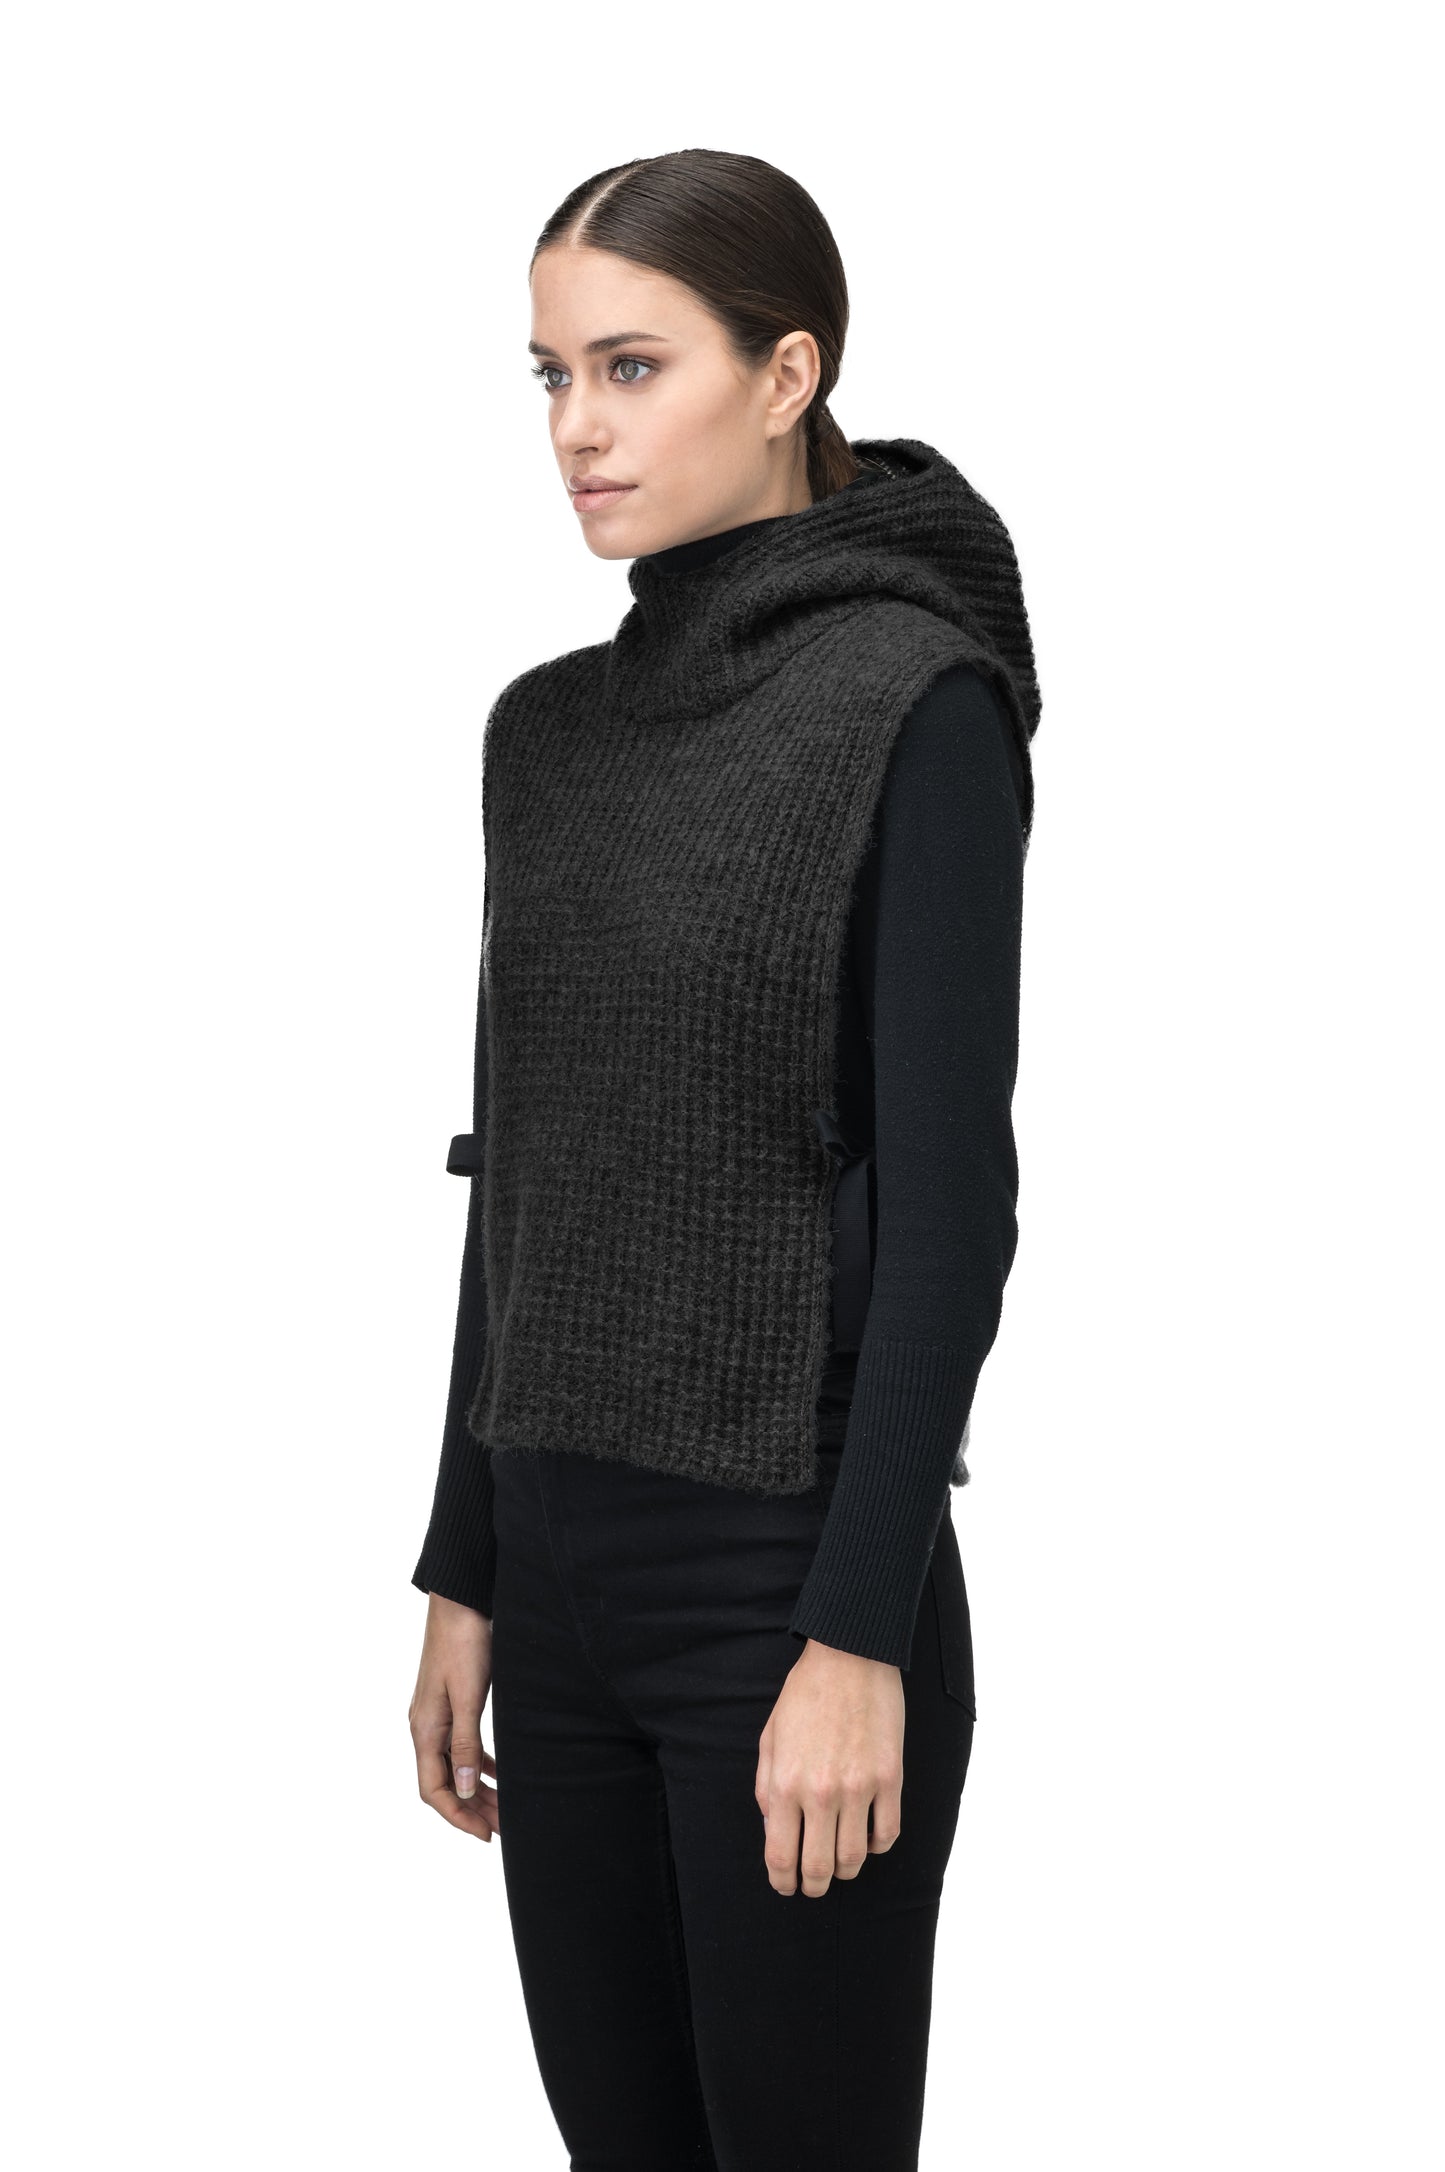 Nars Unisex Knit Hooded Dickie in in superfine alpaca and merino wool blend, waist length, fitted hood, sleeveless torso, and side webbing straps to adjust fit, in Black